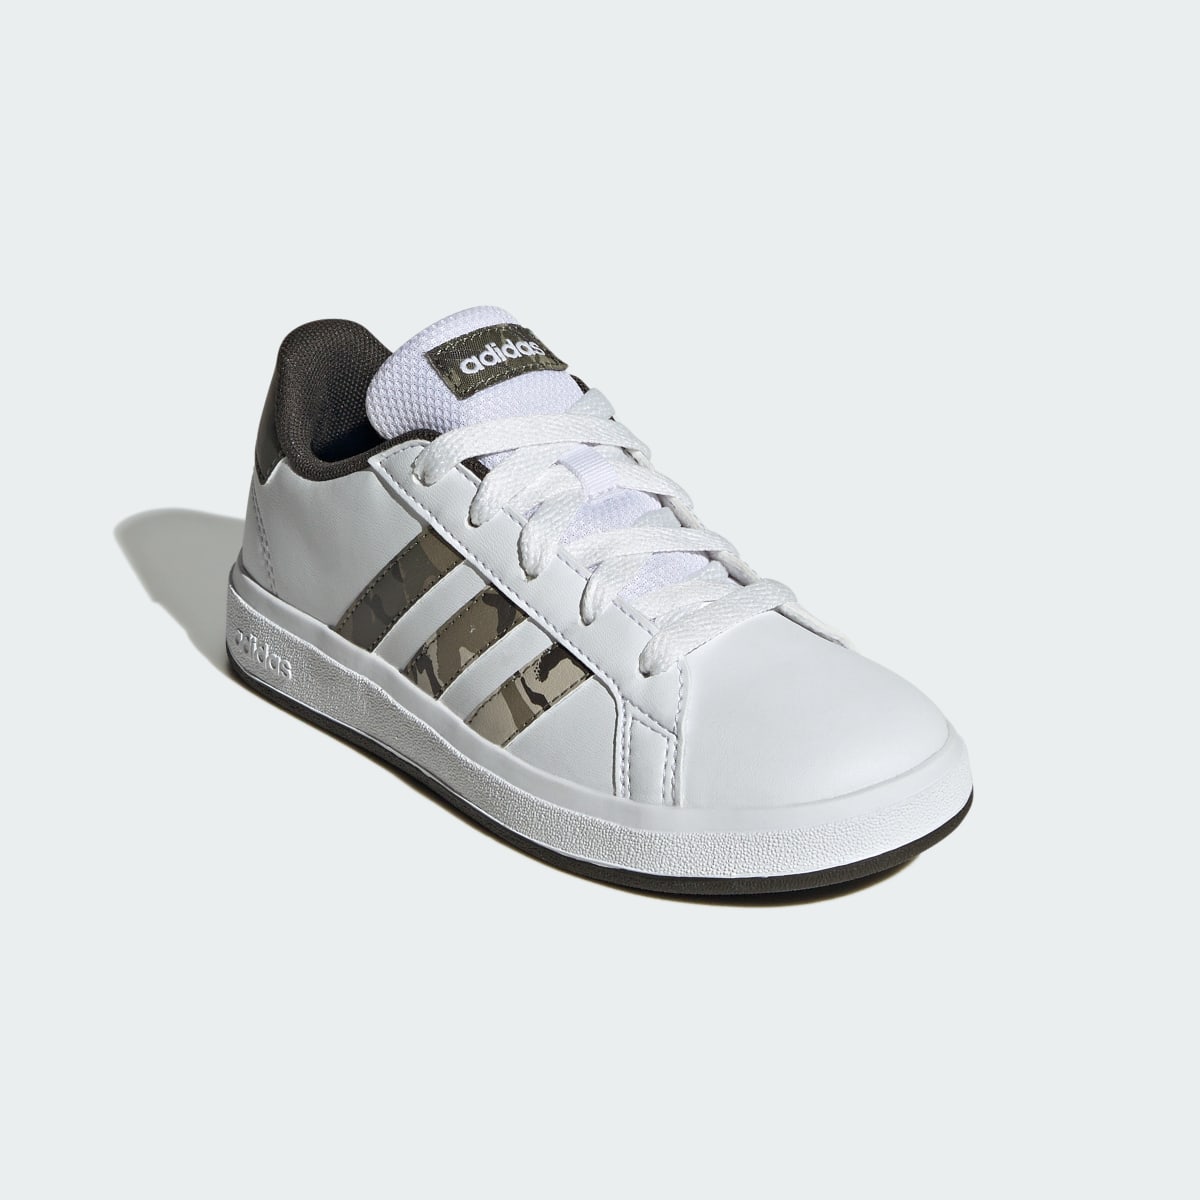 Adidas Grand Court 2.0 Shoes Kids. 5